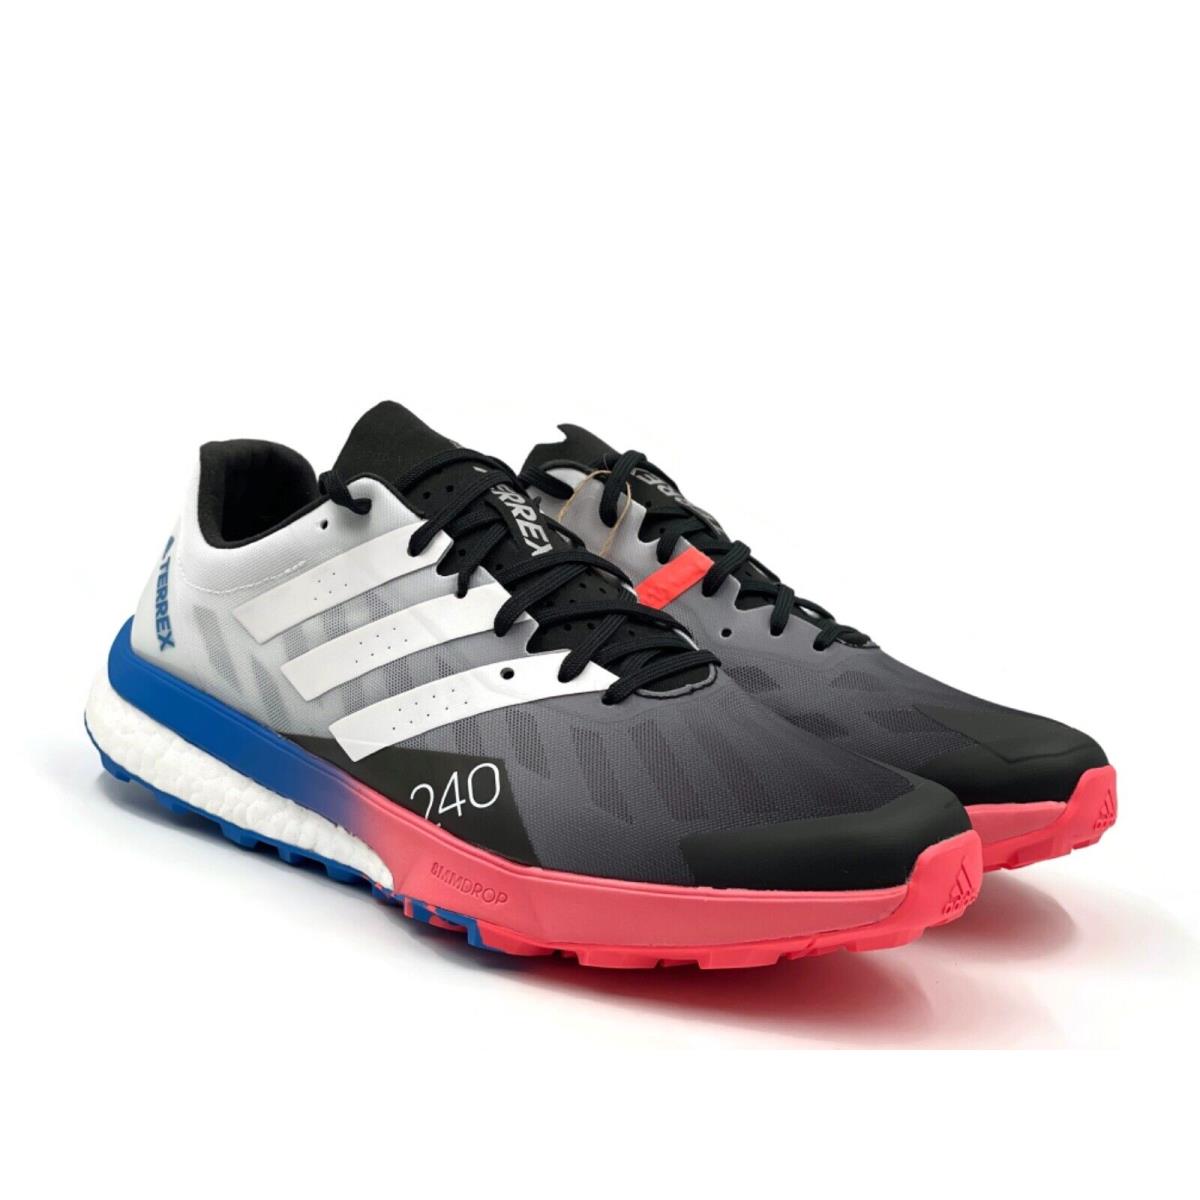 Adidas shoes TERREX Speed Ultra - Multicolor White Blue Red Black 1